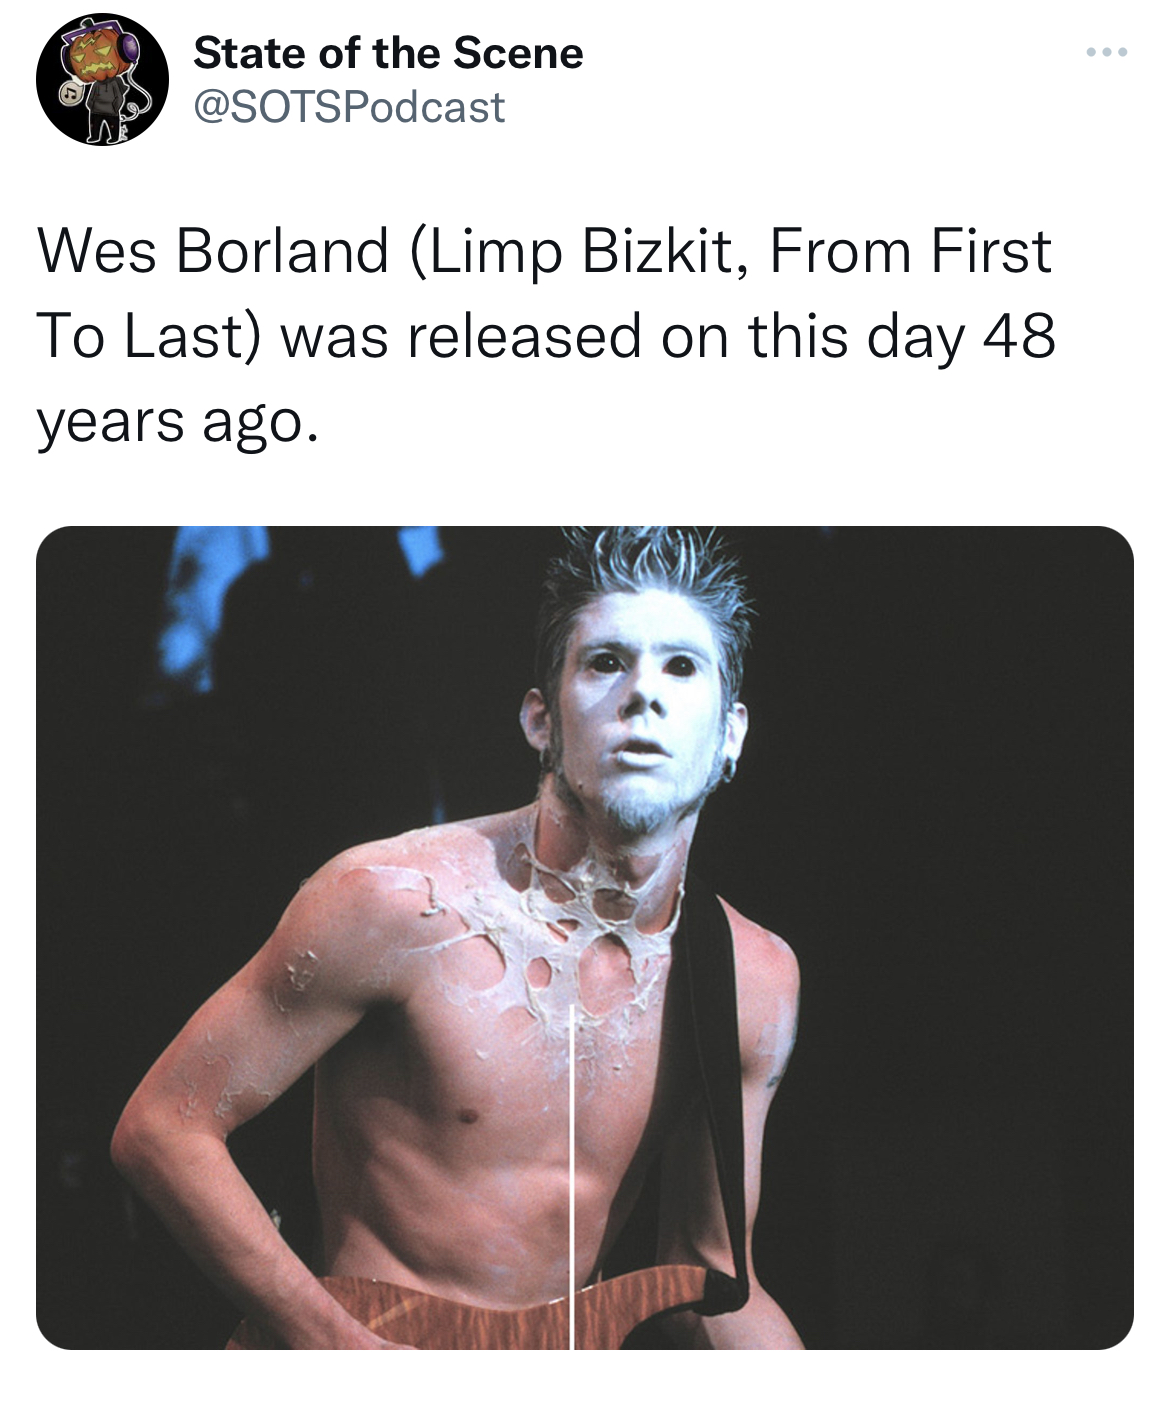 Untamed Tweets - wes borland - State of the Scene Wes Borland Limp Bizkit, From First To Last was released on this day 48 years ago.